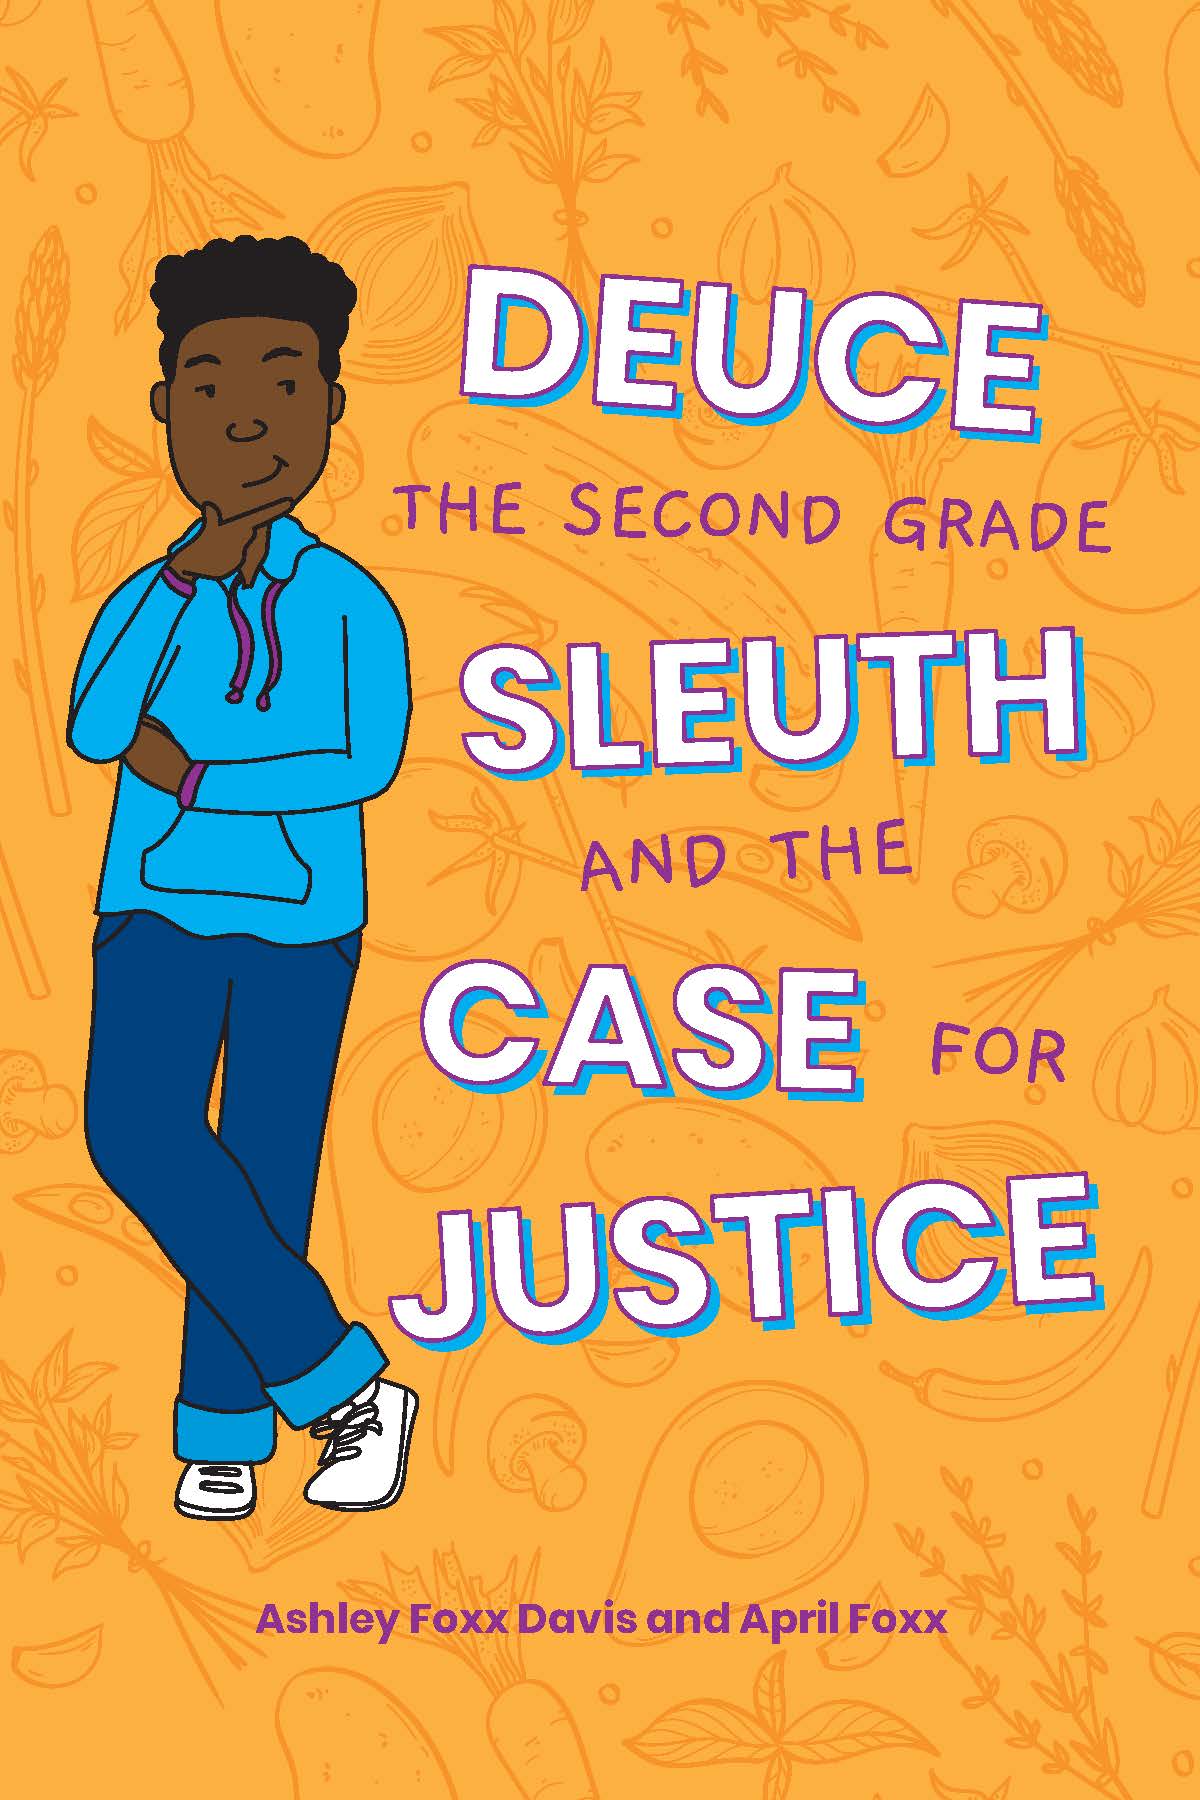 Deuce, The Second Grade Sleuth, and the Case for Justice